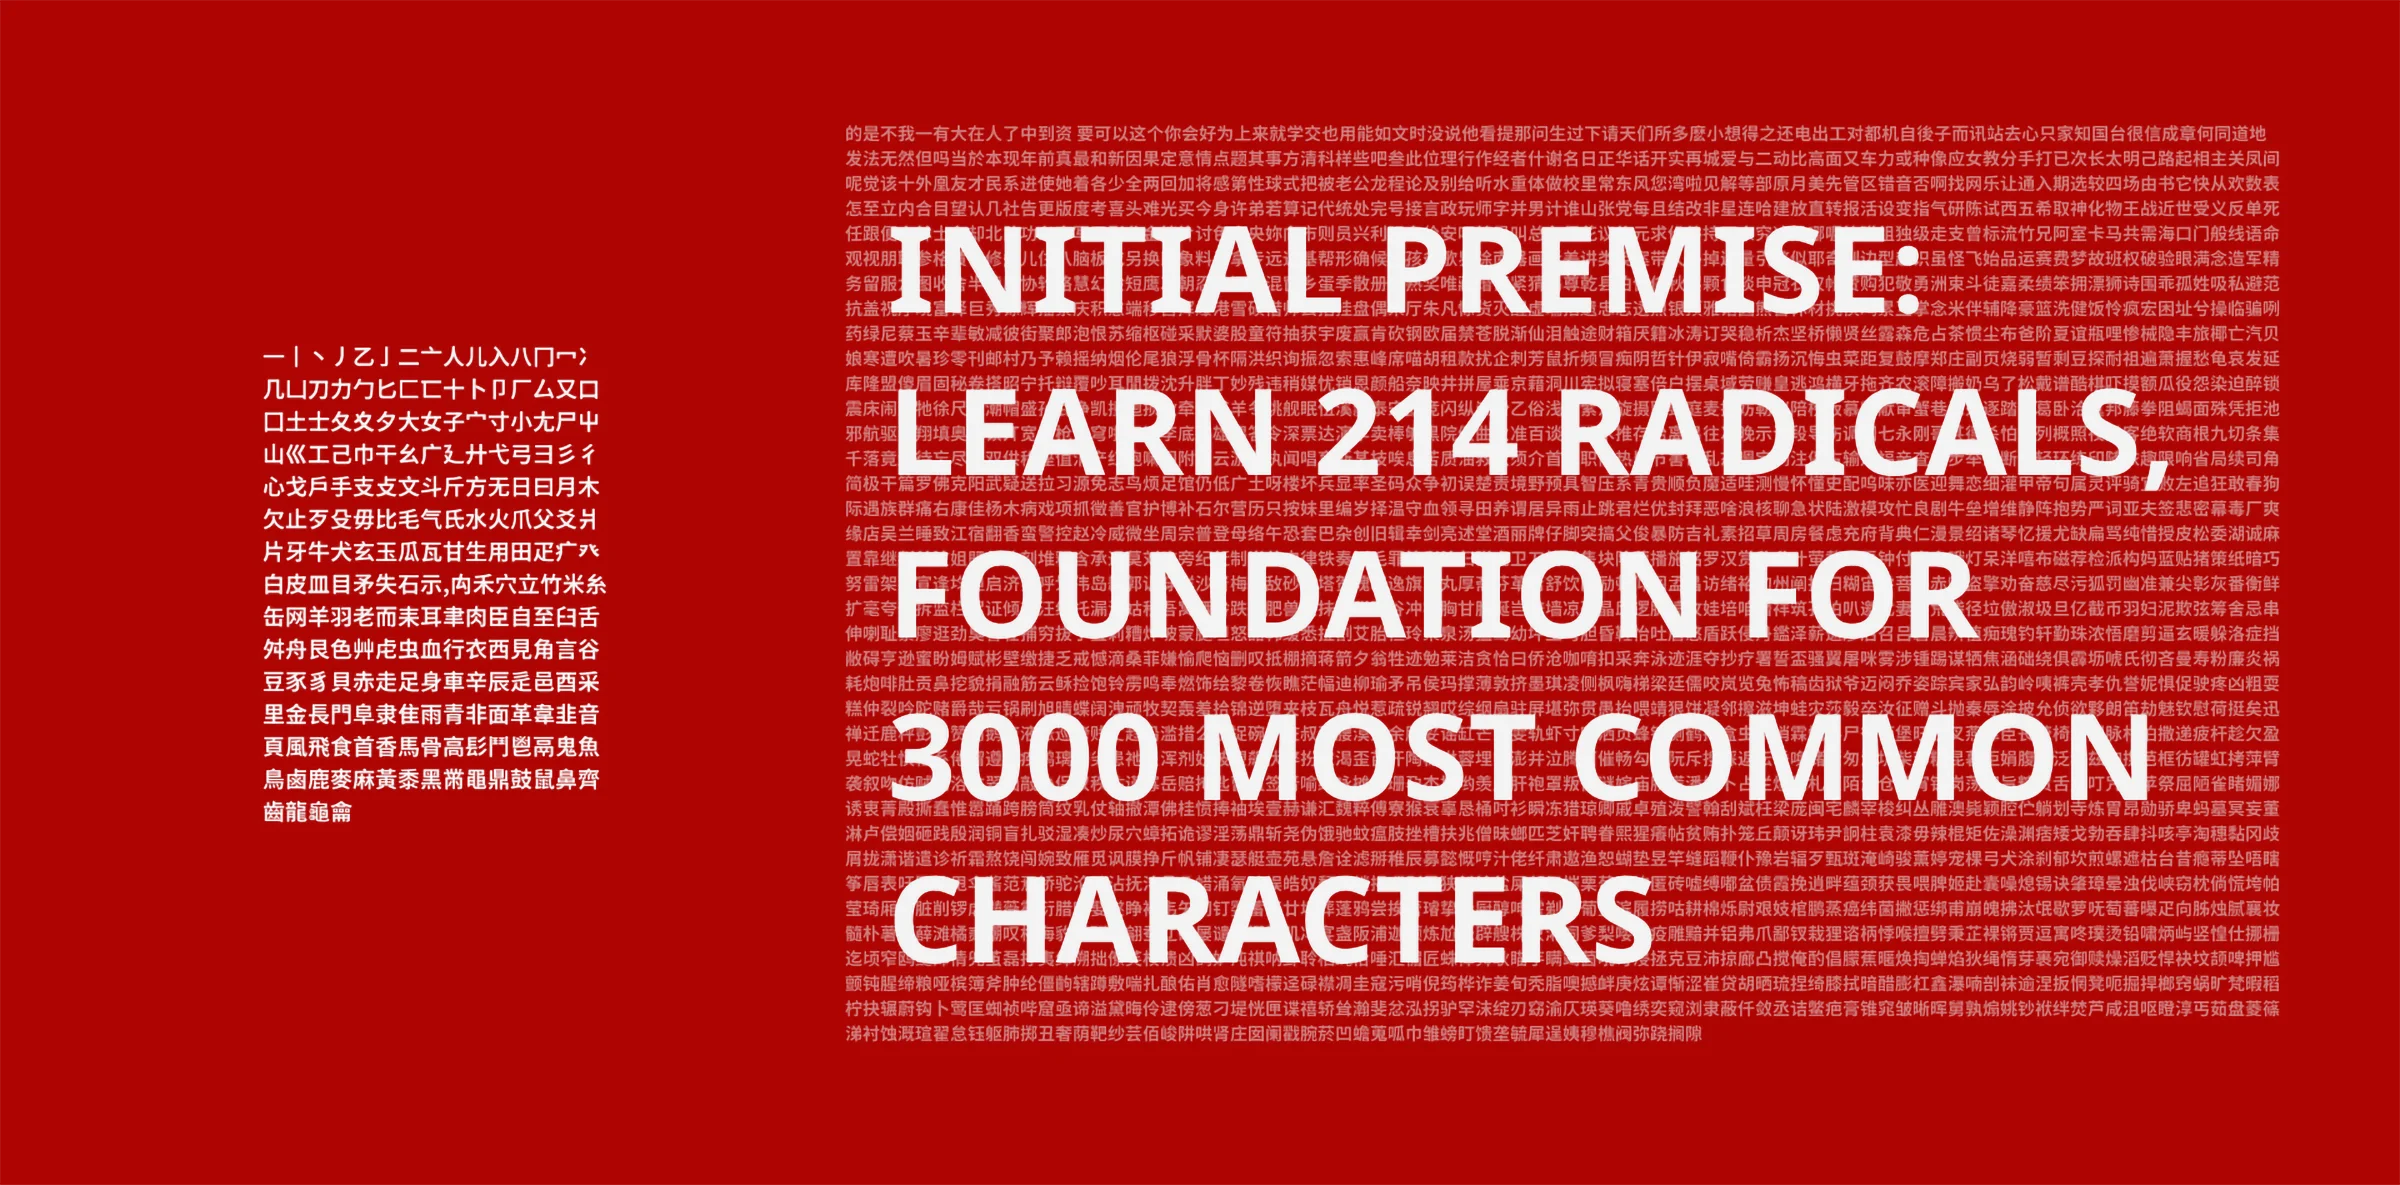 Initial premise: learn 214 radicals as foundation for 3000 most common characters.